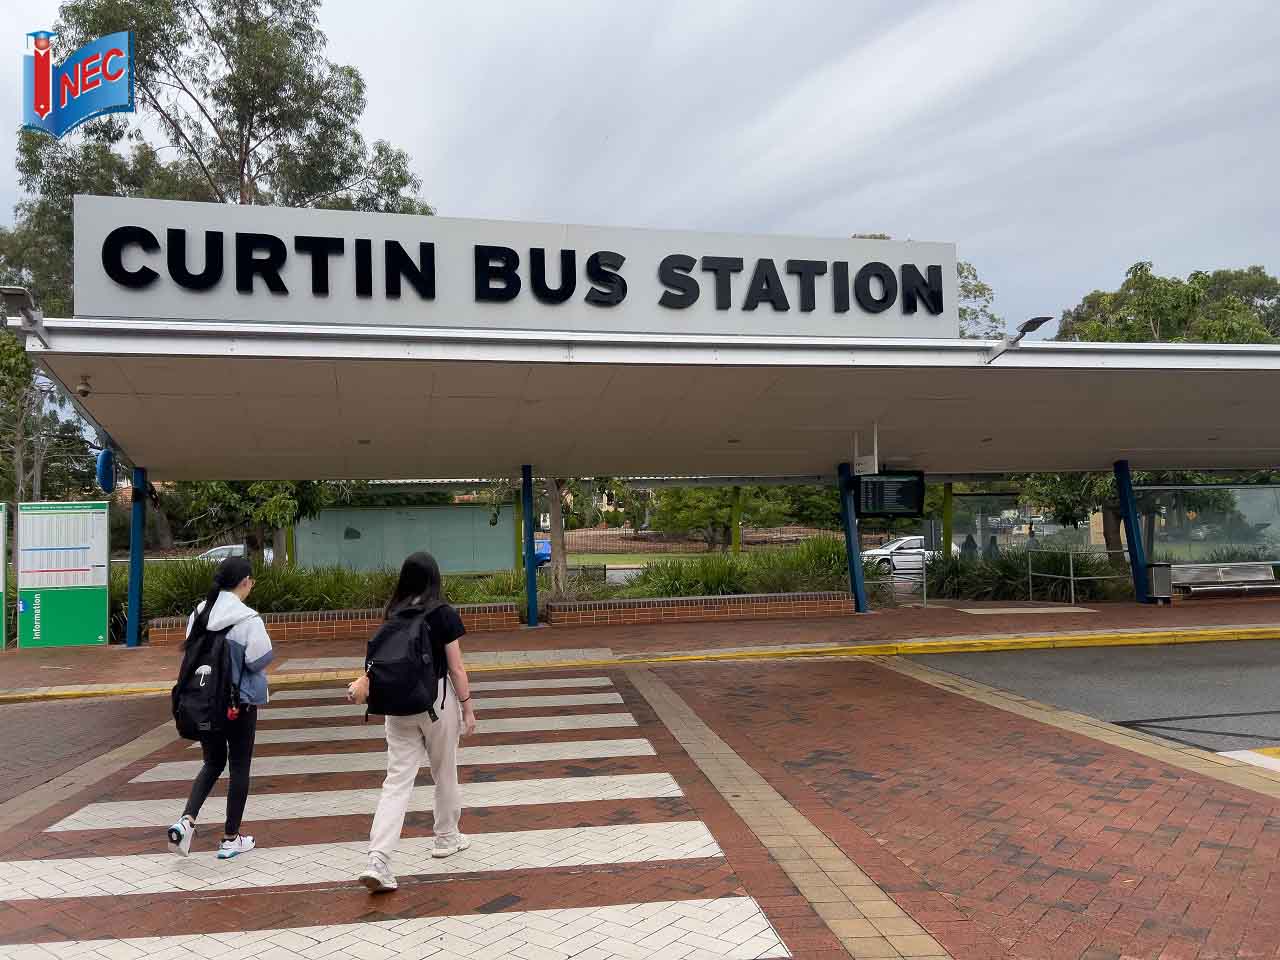 Curtin bus station